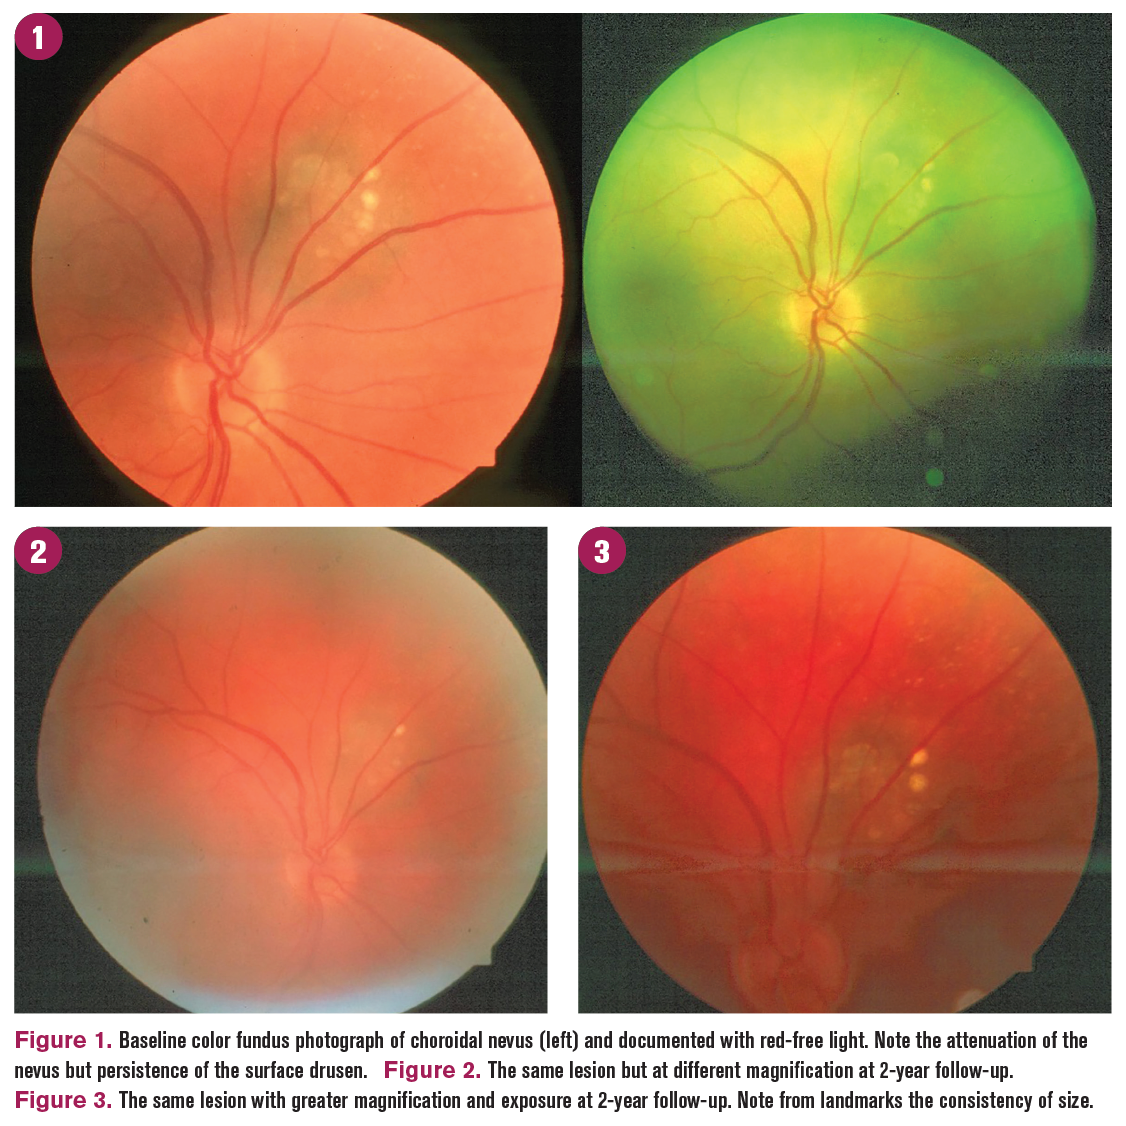 How to differentiate between choroidal nevus and choroidal melanoma